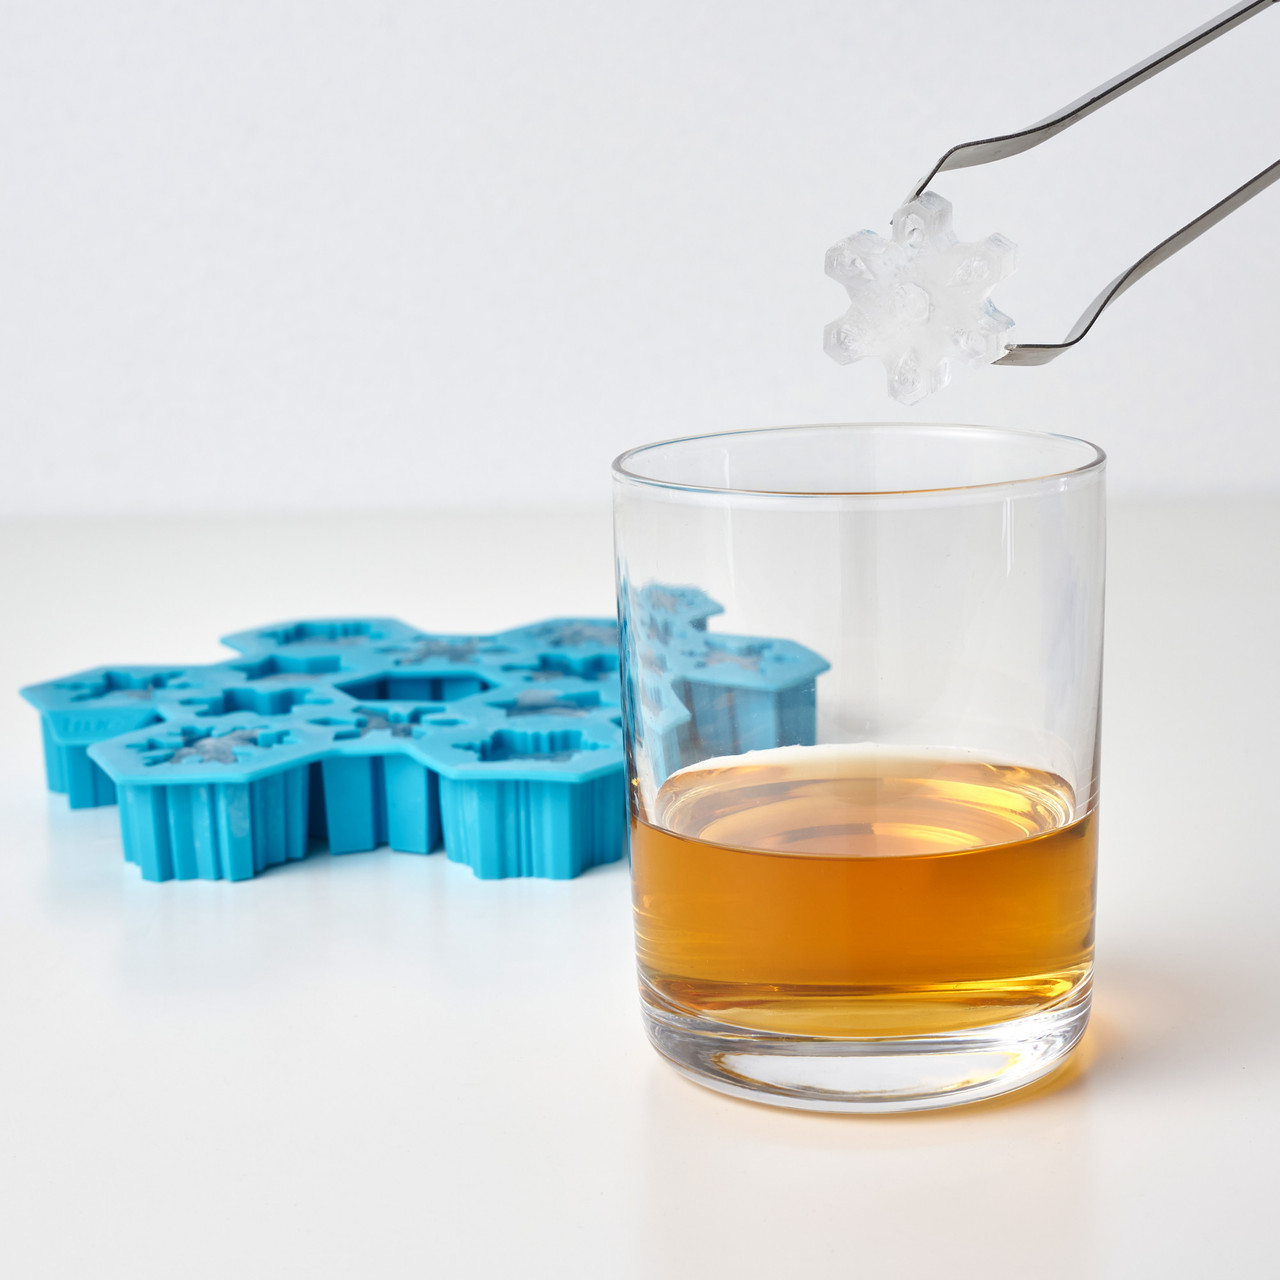 Snowflake Silicone Ice Cube Tray by TrueZoo